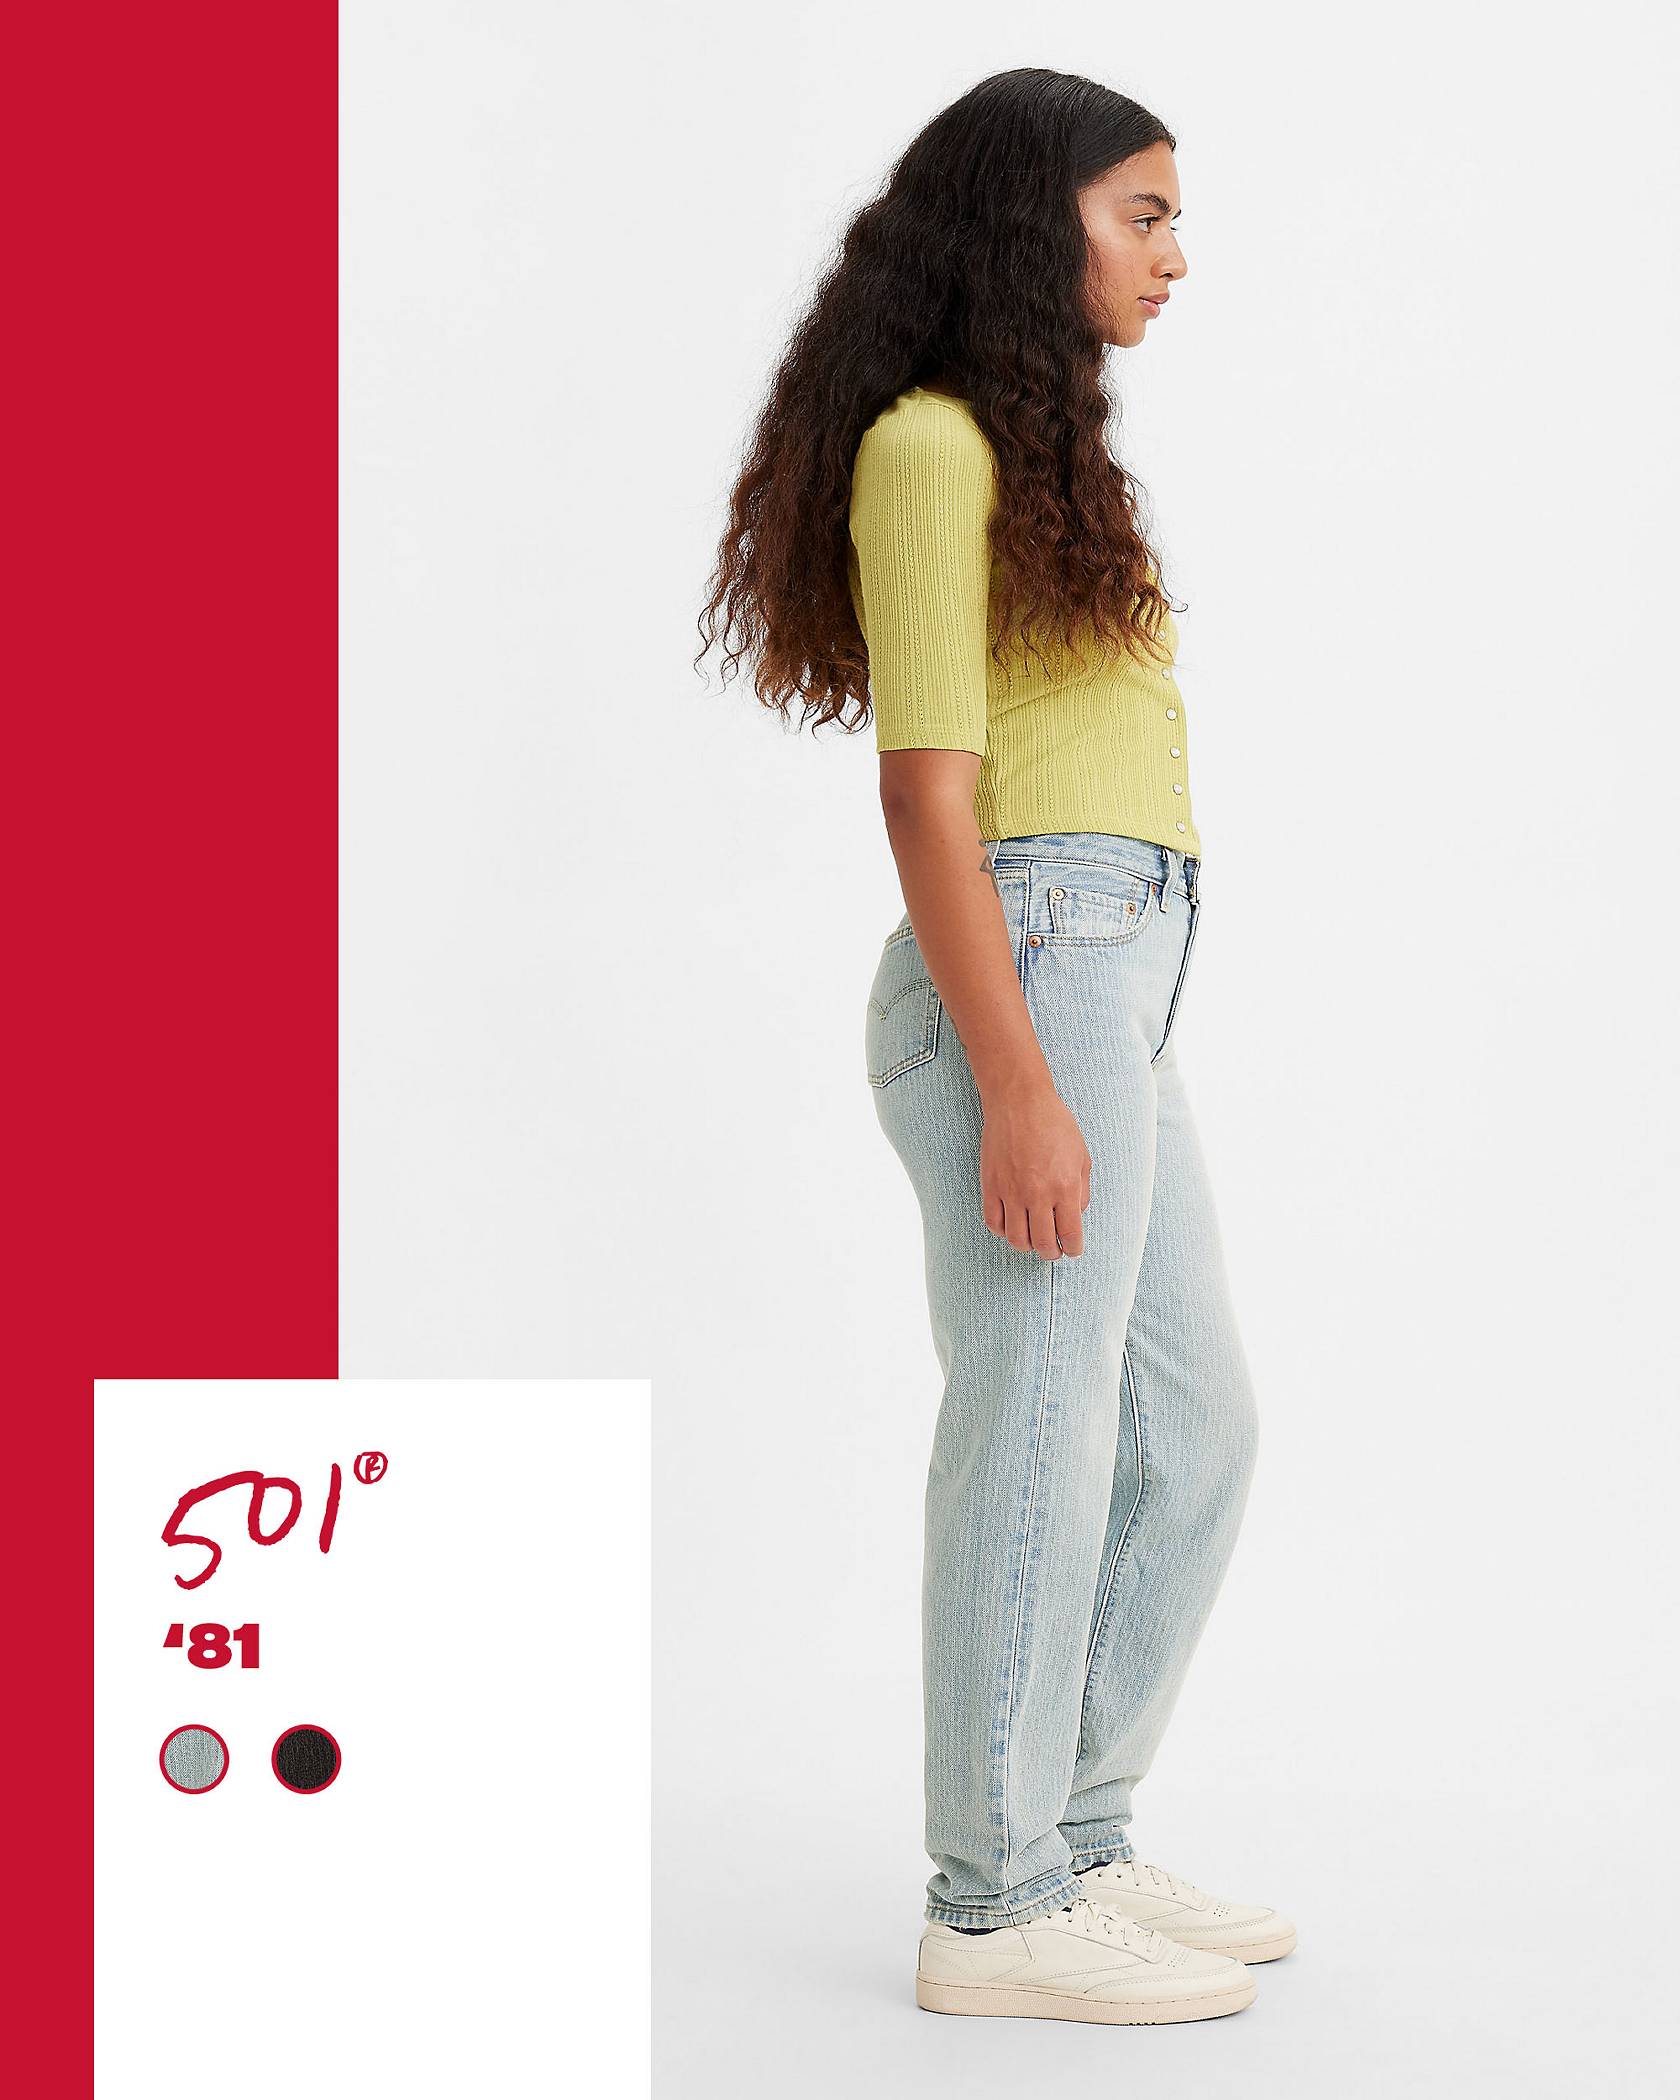 Paneled shot of model in light wash 501® '81 jeans with a red tag displaying product name and sample color swatches